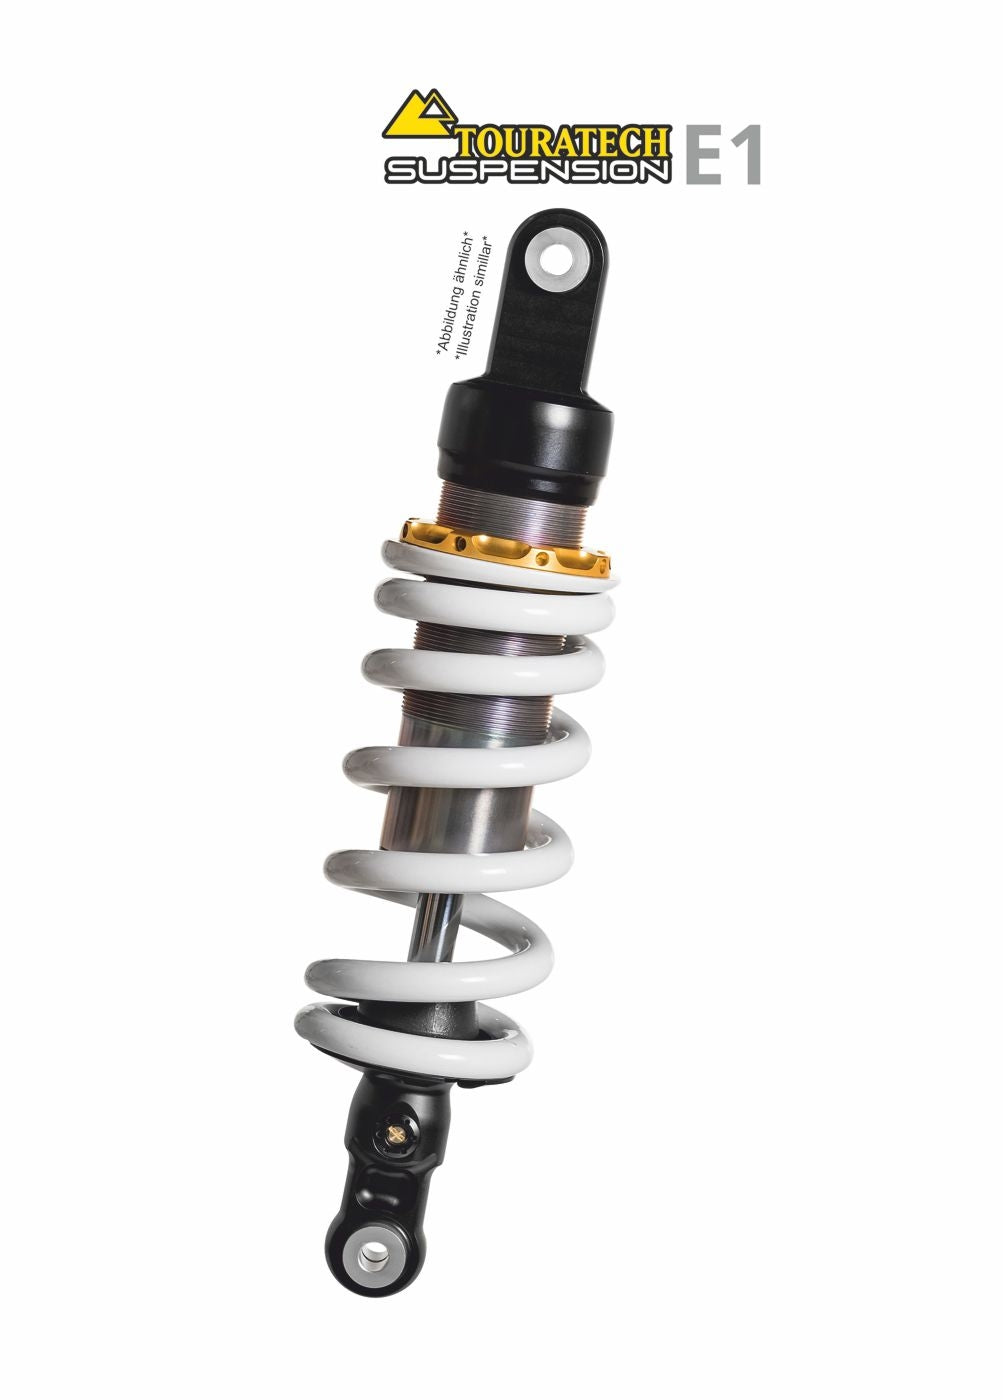 Touratech Suspension E1 shock absorber for Triumph TIGER 800 XC 2011 - 2014